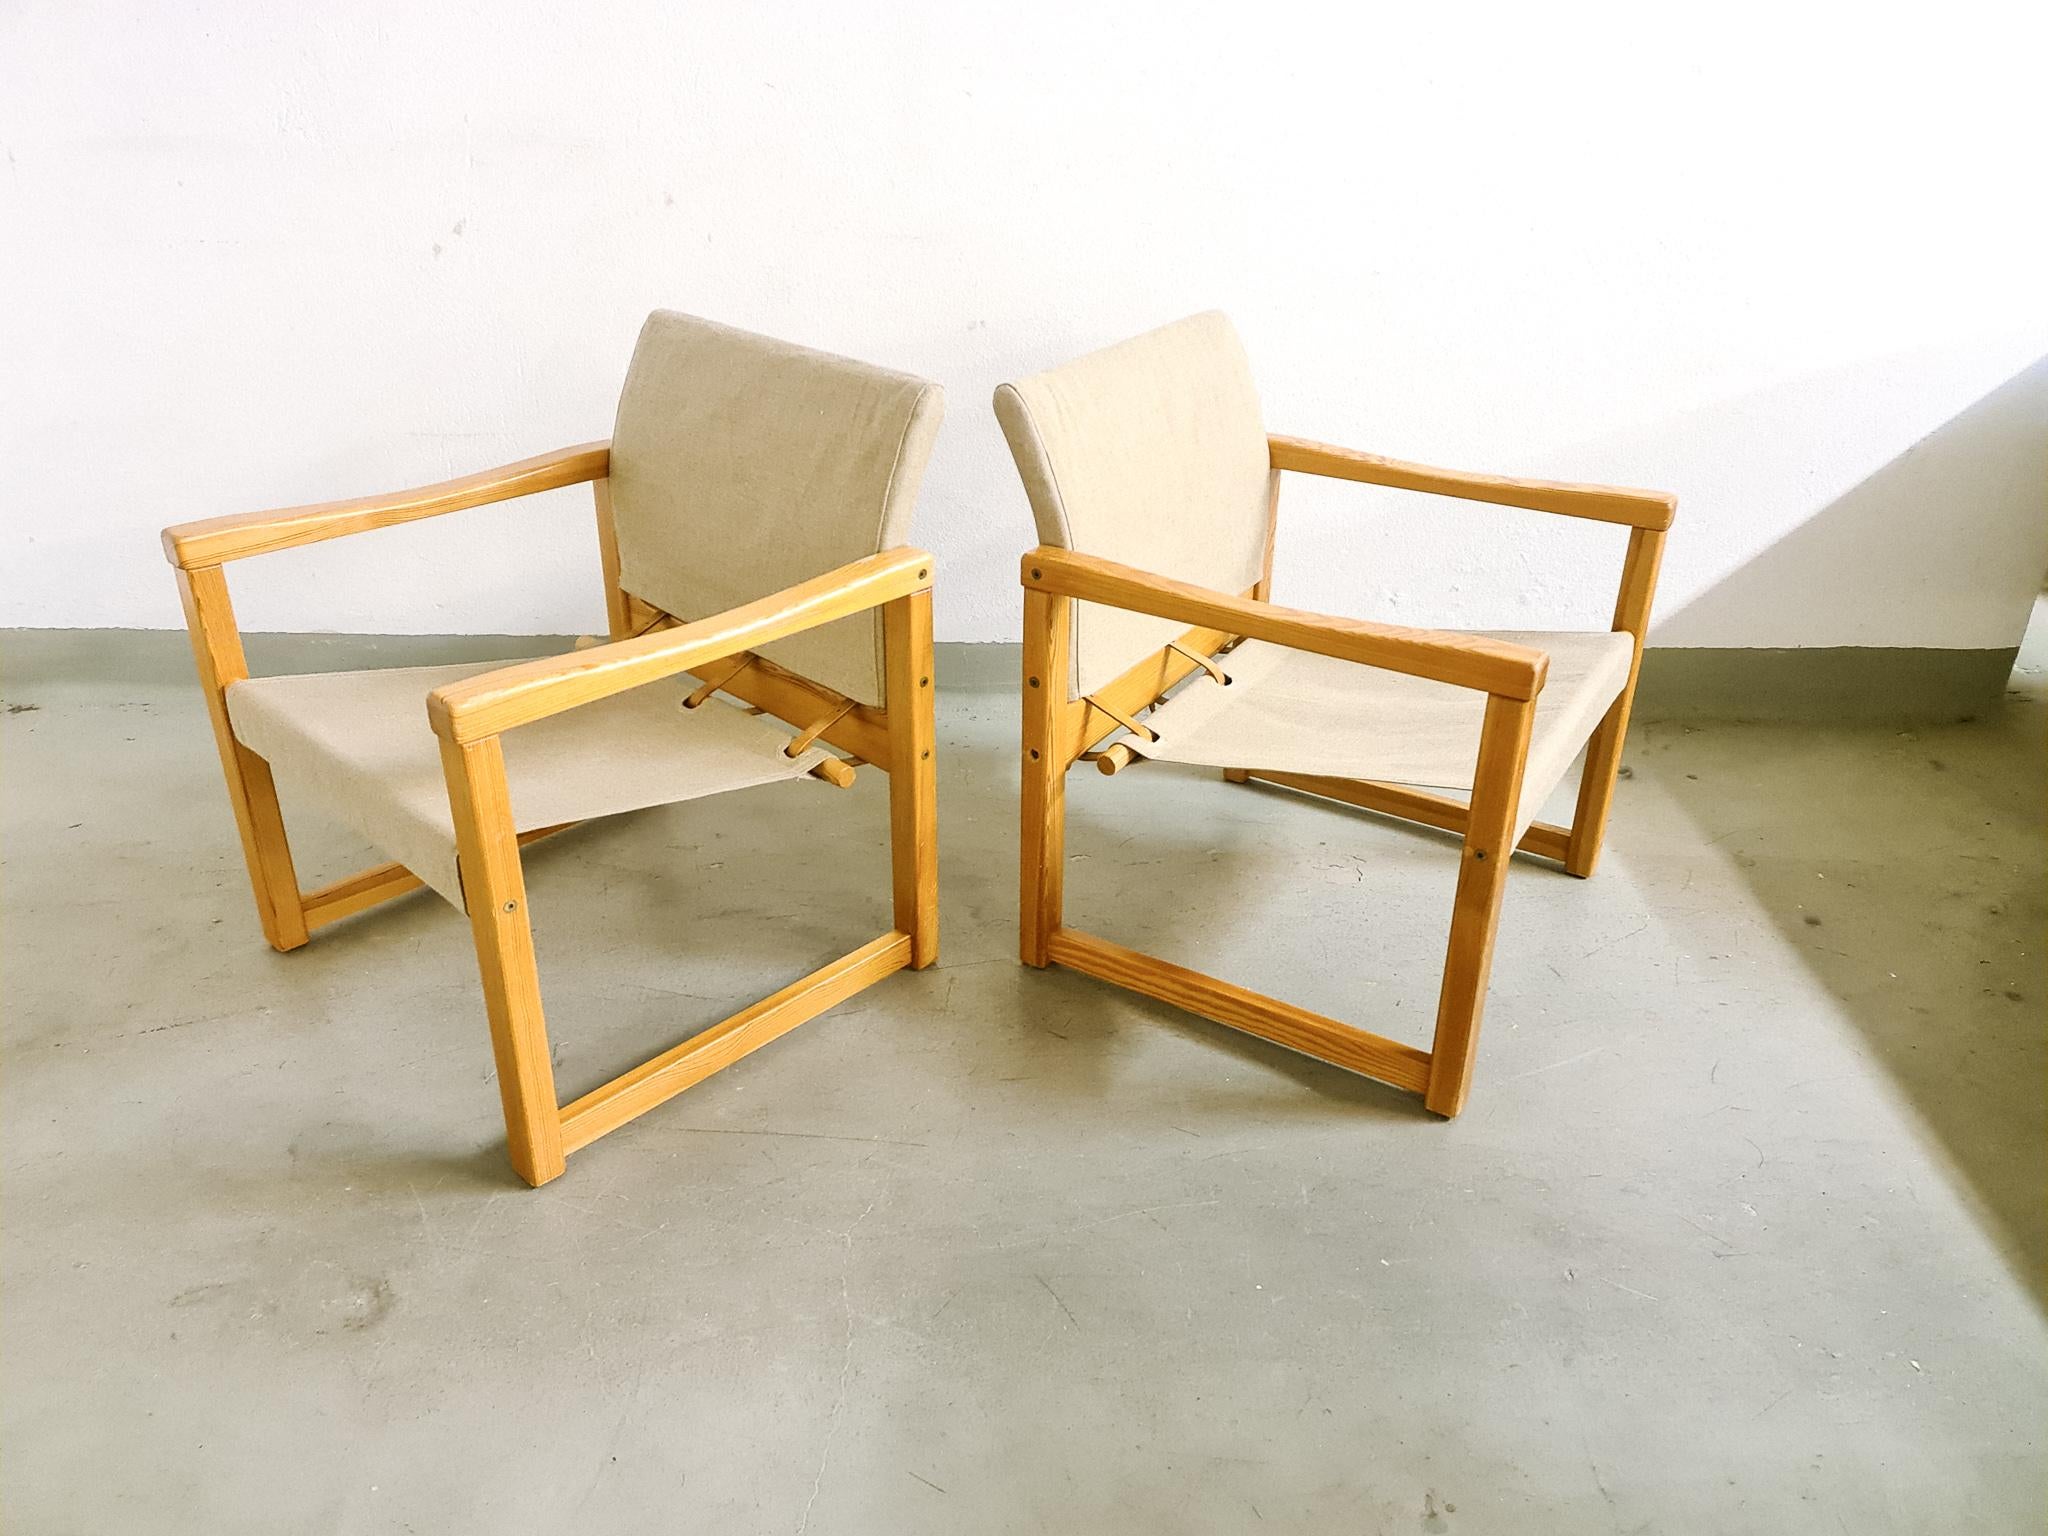 Armchairs model Diana designed by Karin Mobring, 1974. Produced by Ikea in Sweden.
These ones are sold as a pair. The frame is made in lacquered pine, and the upholstery is made in new quality Swedish linen. 

Good / fair vintage condition. Great